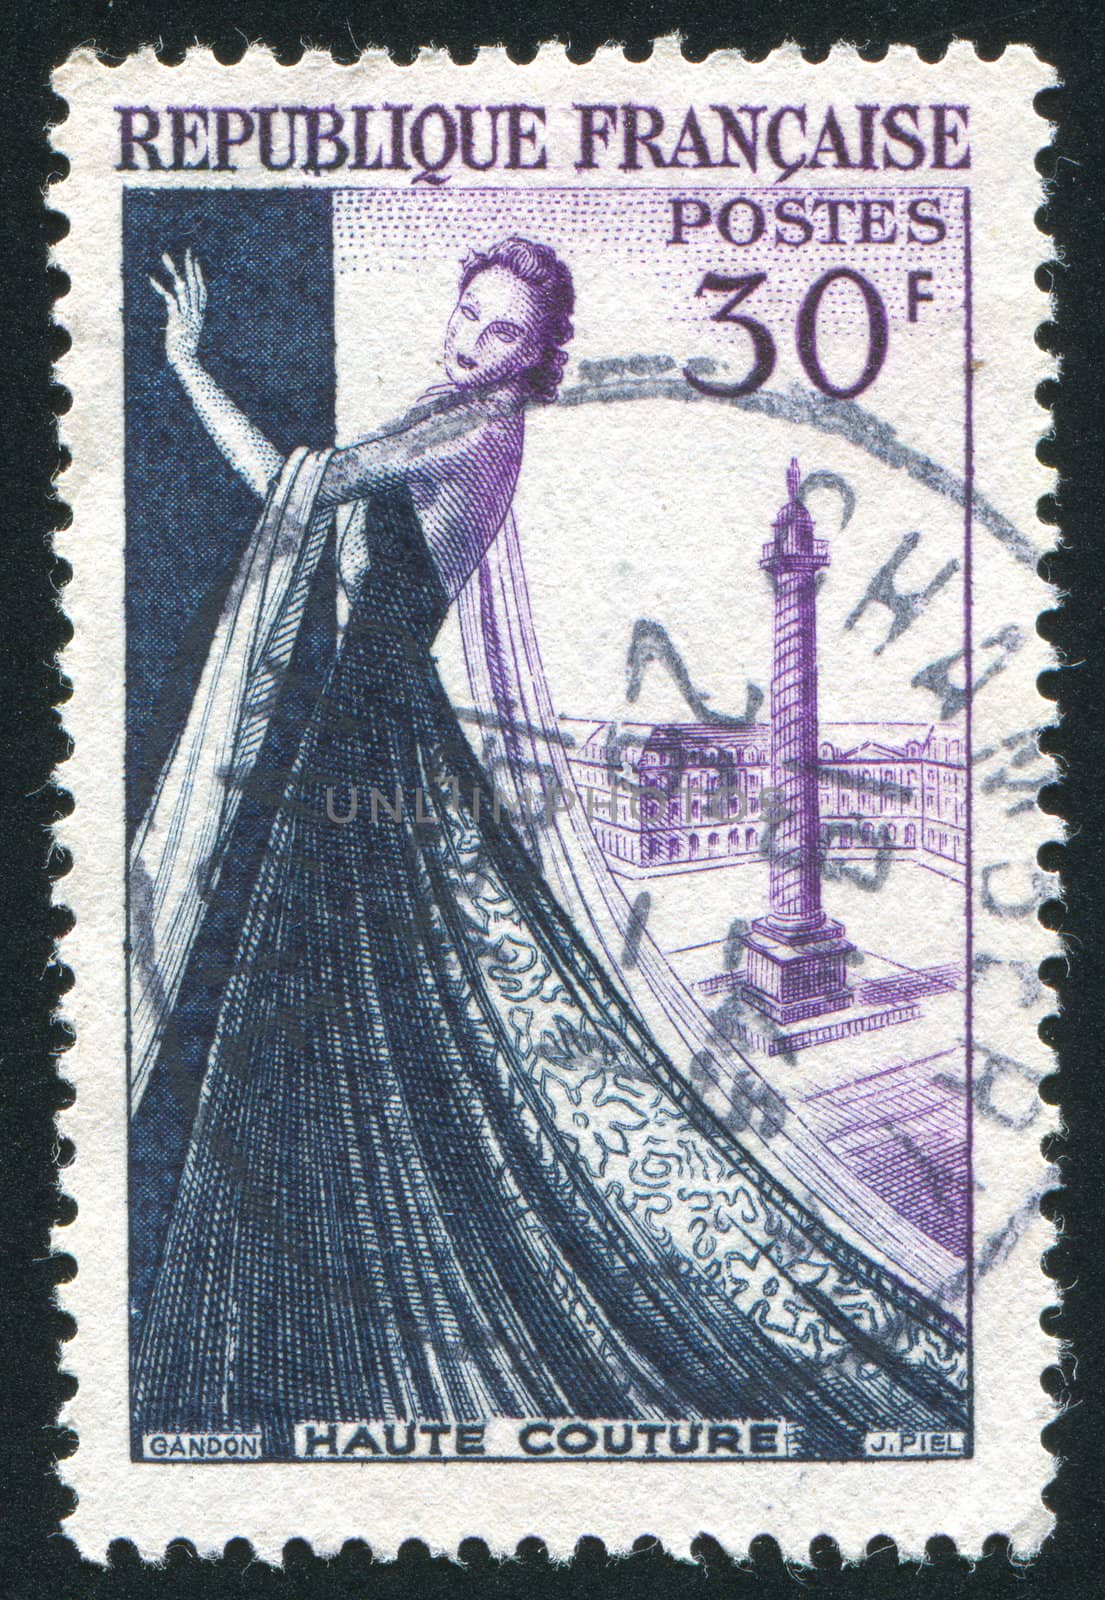 FRANCE - CIRCA 1953: stamp printed by France, shows Mannequin, dressmaking industry of France, circa 1953